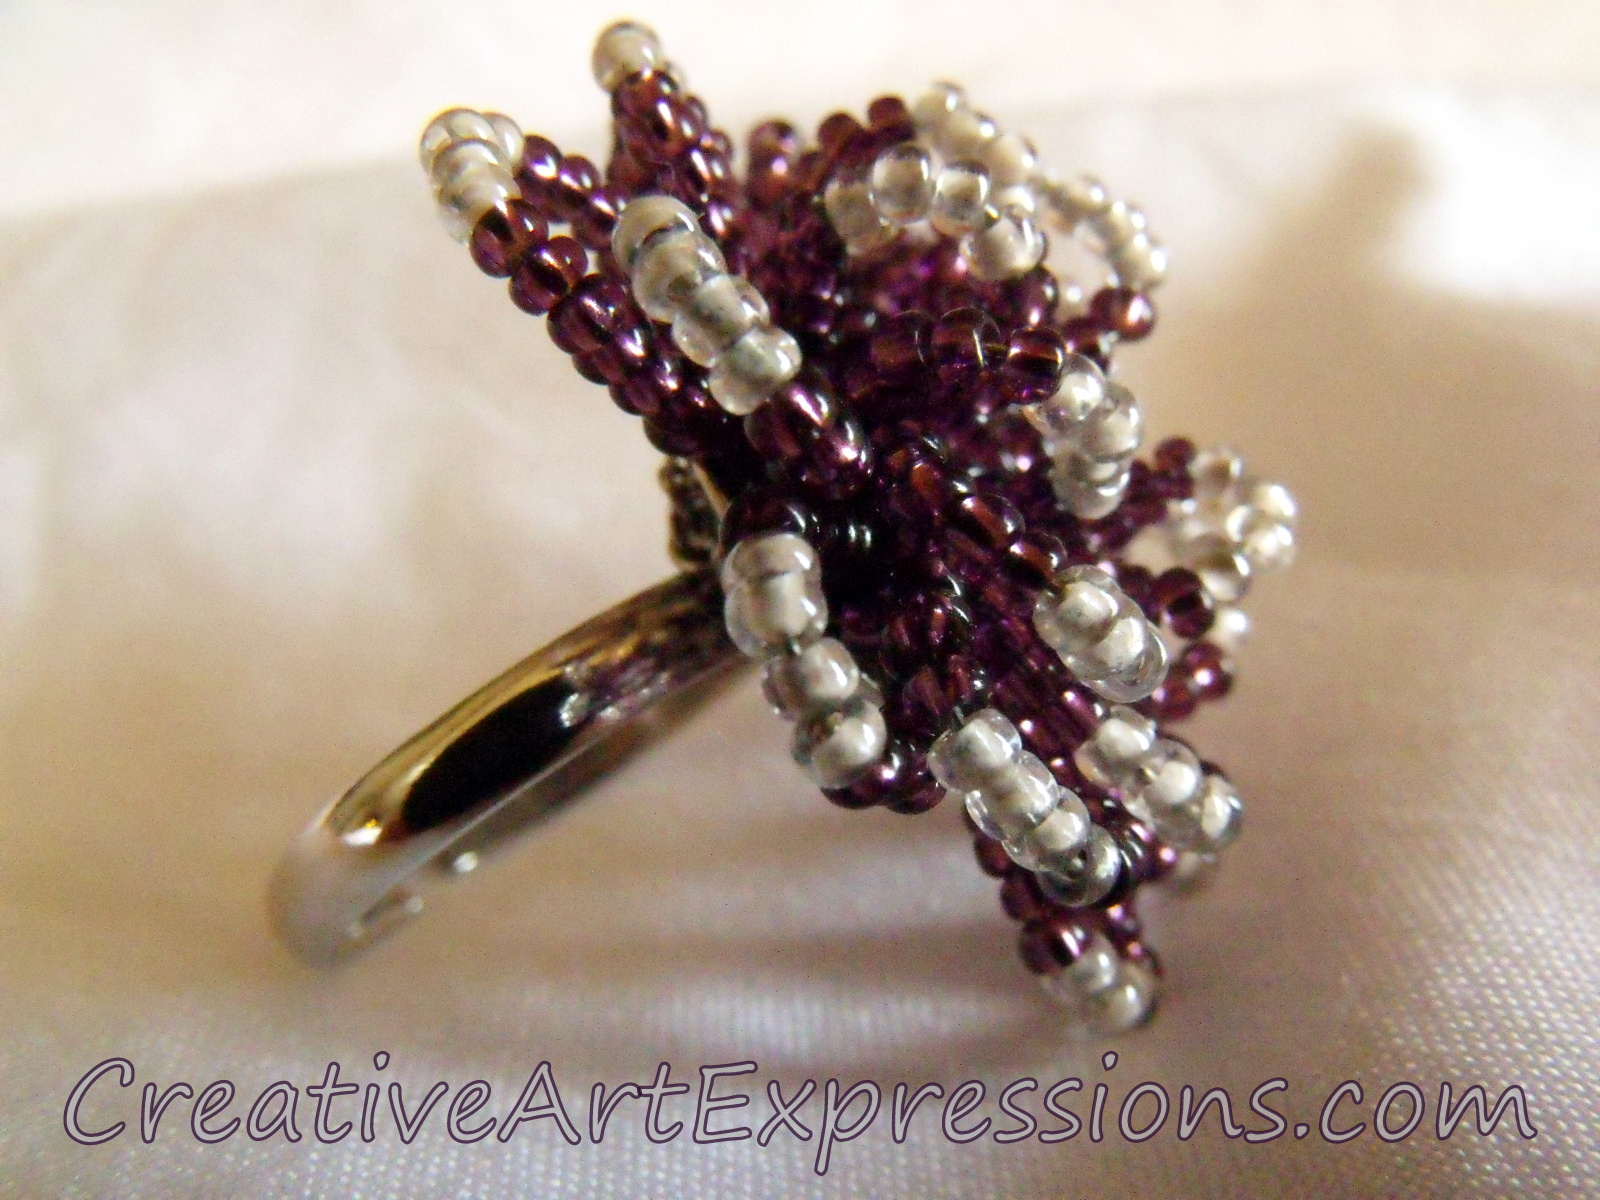 Creative Art Expressions Handmade Amerthyst & Crystal Brown Seed Bead Ring Jewelry Design